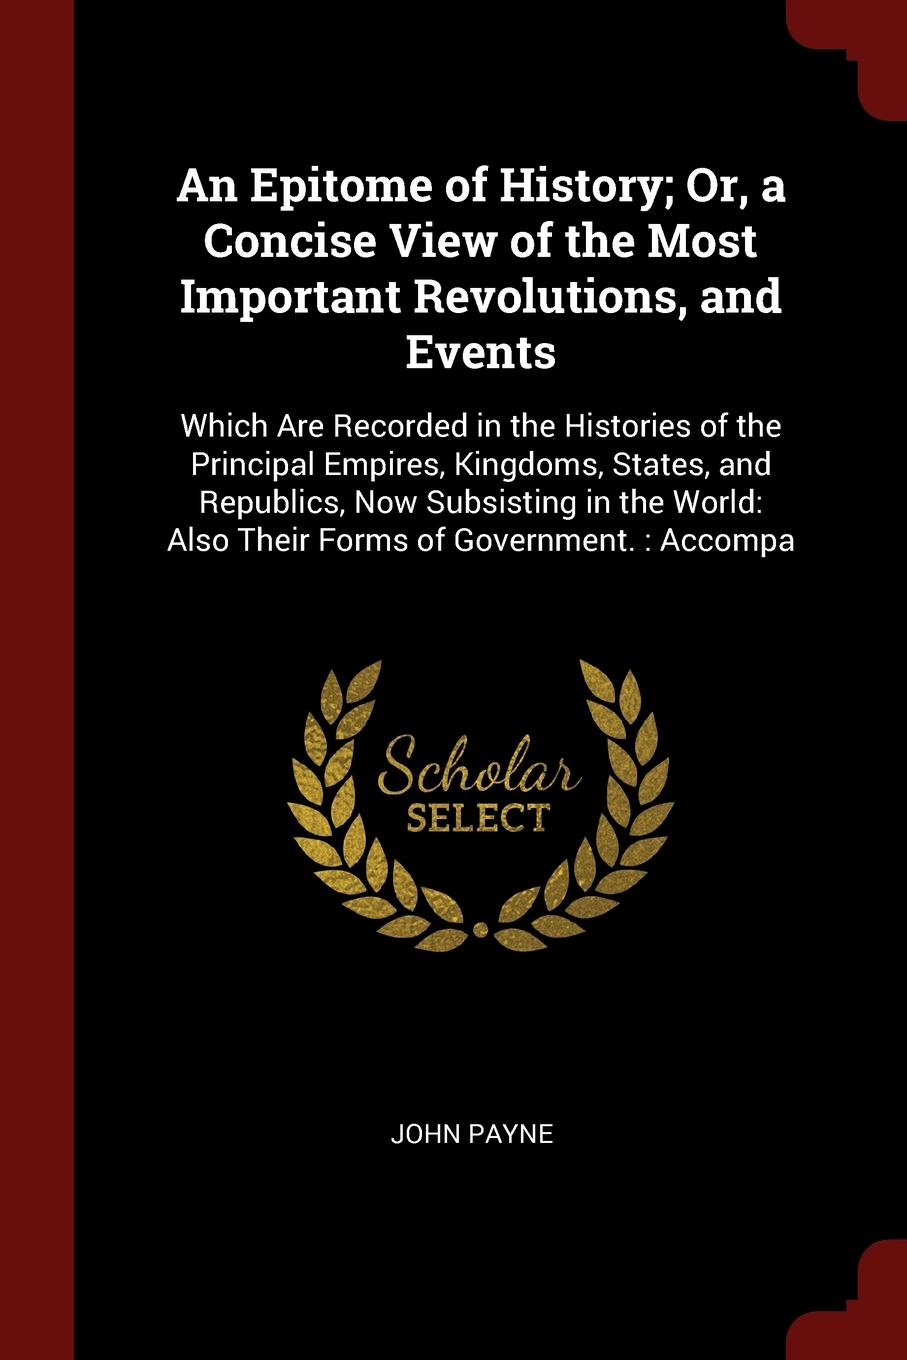 An Epitome of History; Or, a Concise View of the Most Important Revolutions, and Events. Which Are Recorded in the Histories of the Principal Empires, Kingdoms, States, and Republics, Now Subsisting in the World: Also Their Forms of Government. : ...